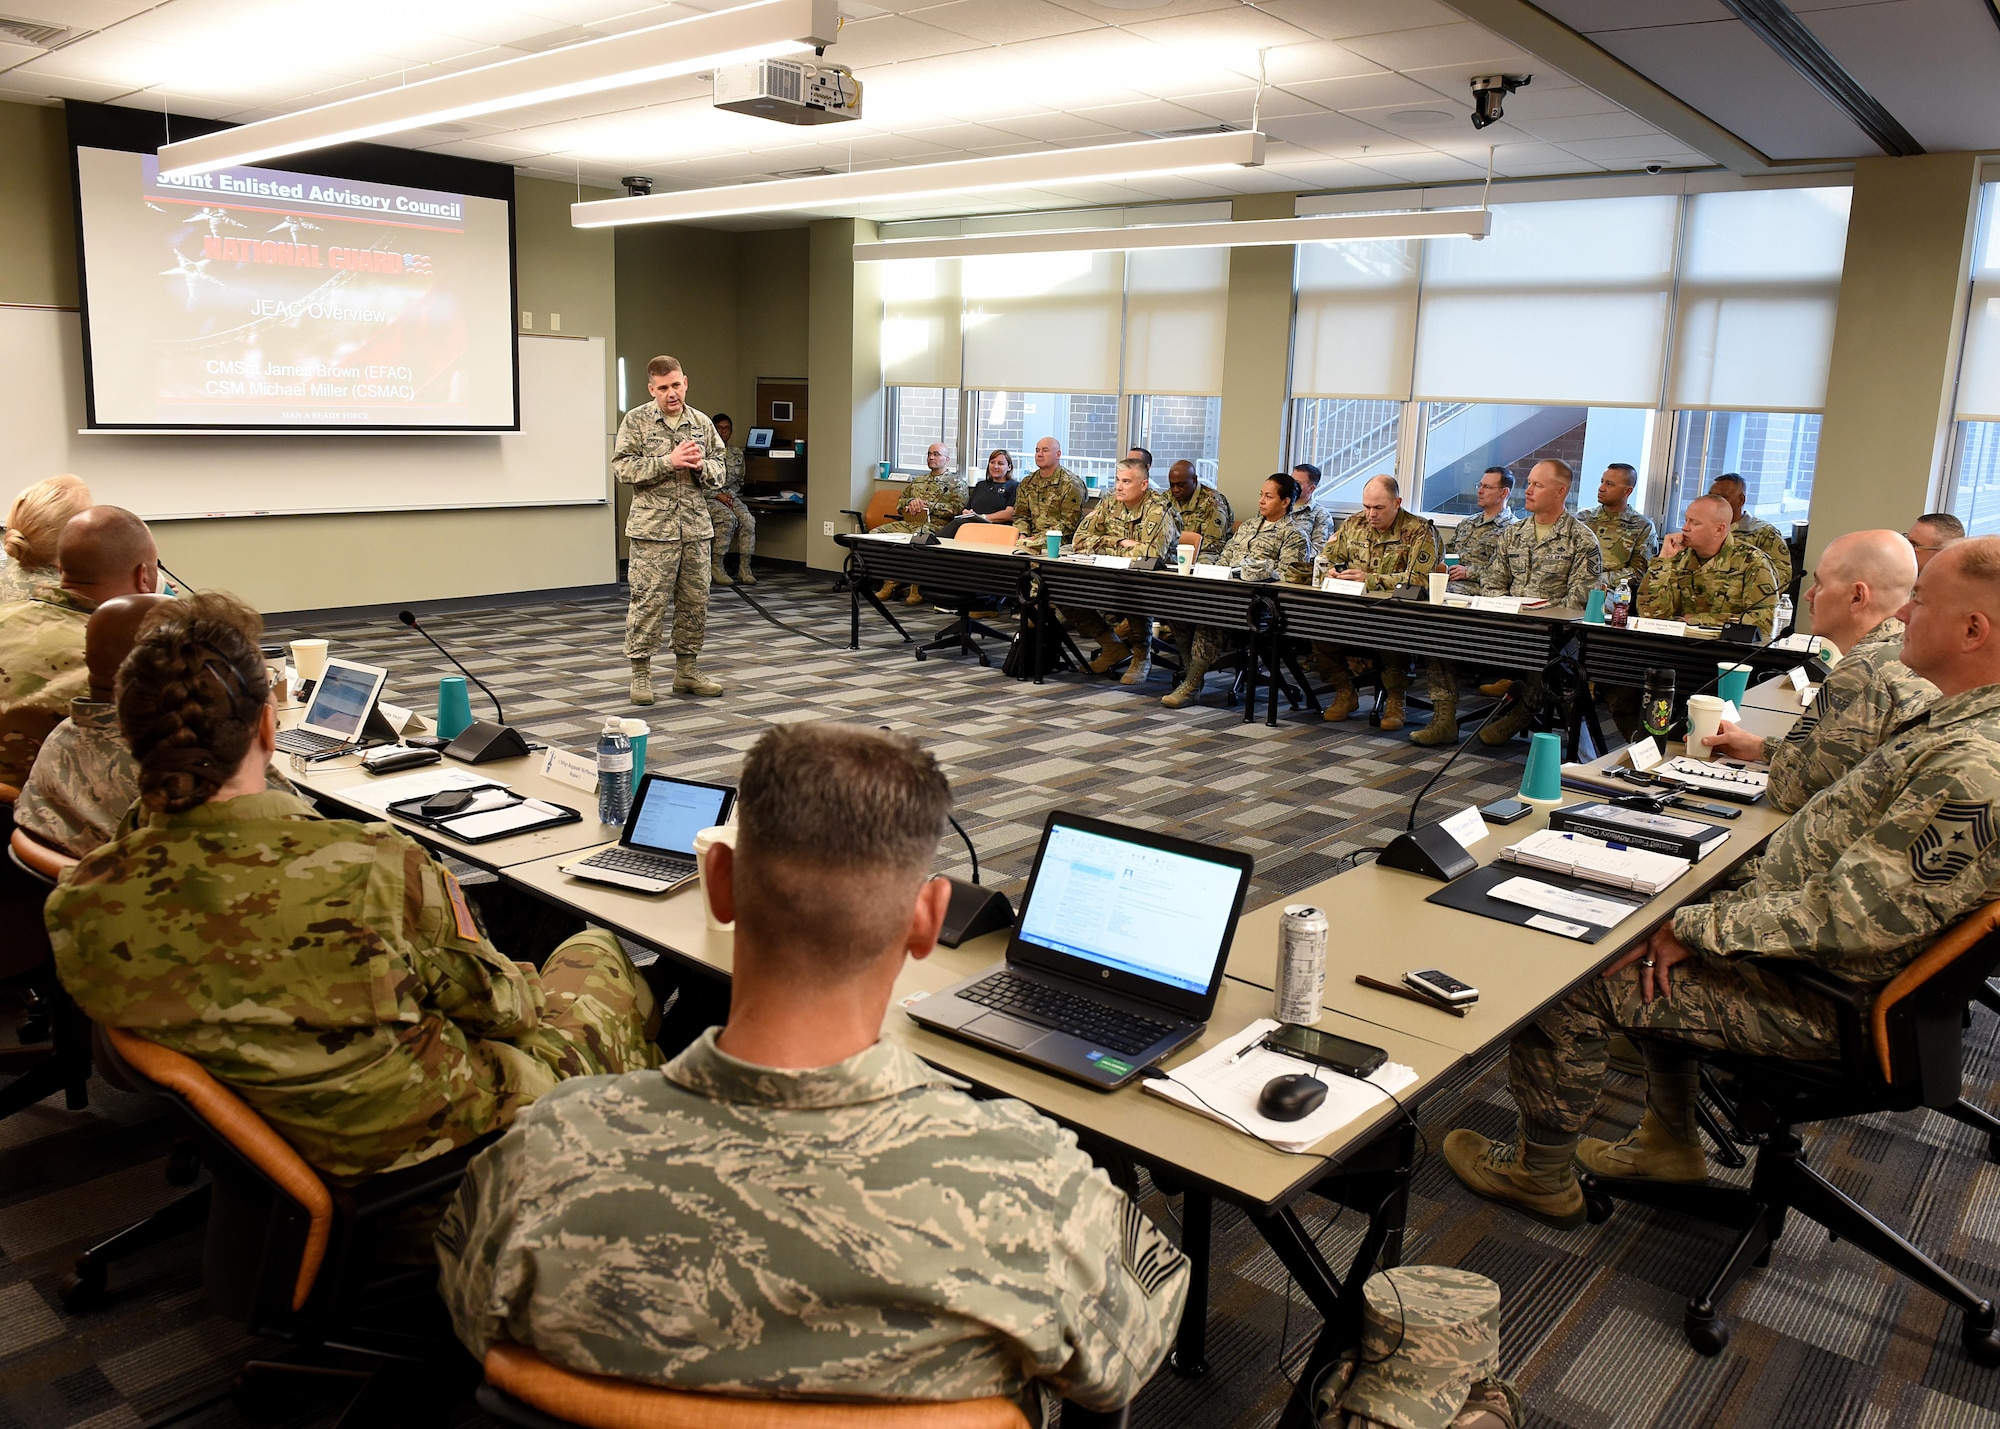 Col. Kevin Donovan, the commander of the I.G. Brown Training and Education Center, welcomes the Army and Air National Guard’s top enlisted leaders to the campus, May 2, 2017, in east Tennessee. The National Guard Joint Enlisted Advisory Council (JEAC) met at TEC this week to work together, as well as within their component groups, and coordinate efforts addressing enlisted Guard members. (U.S. Air National Guard photo by Master Sgt. Mike R. Smith)